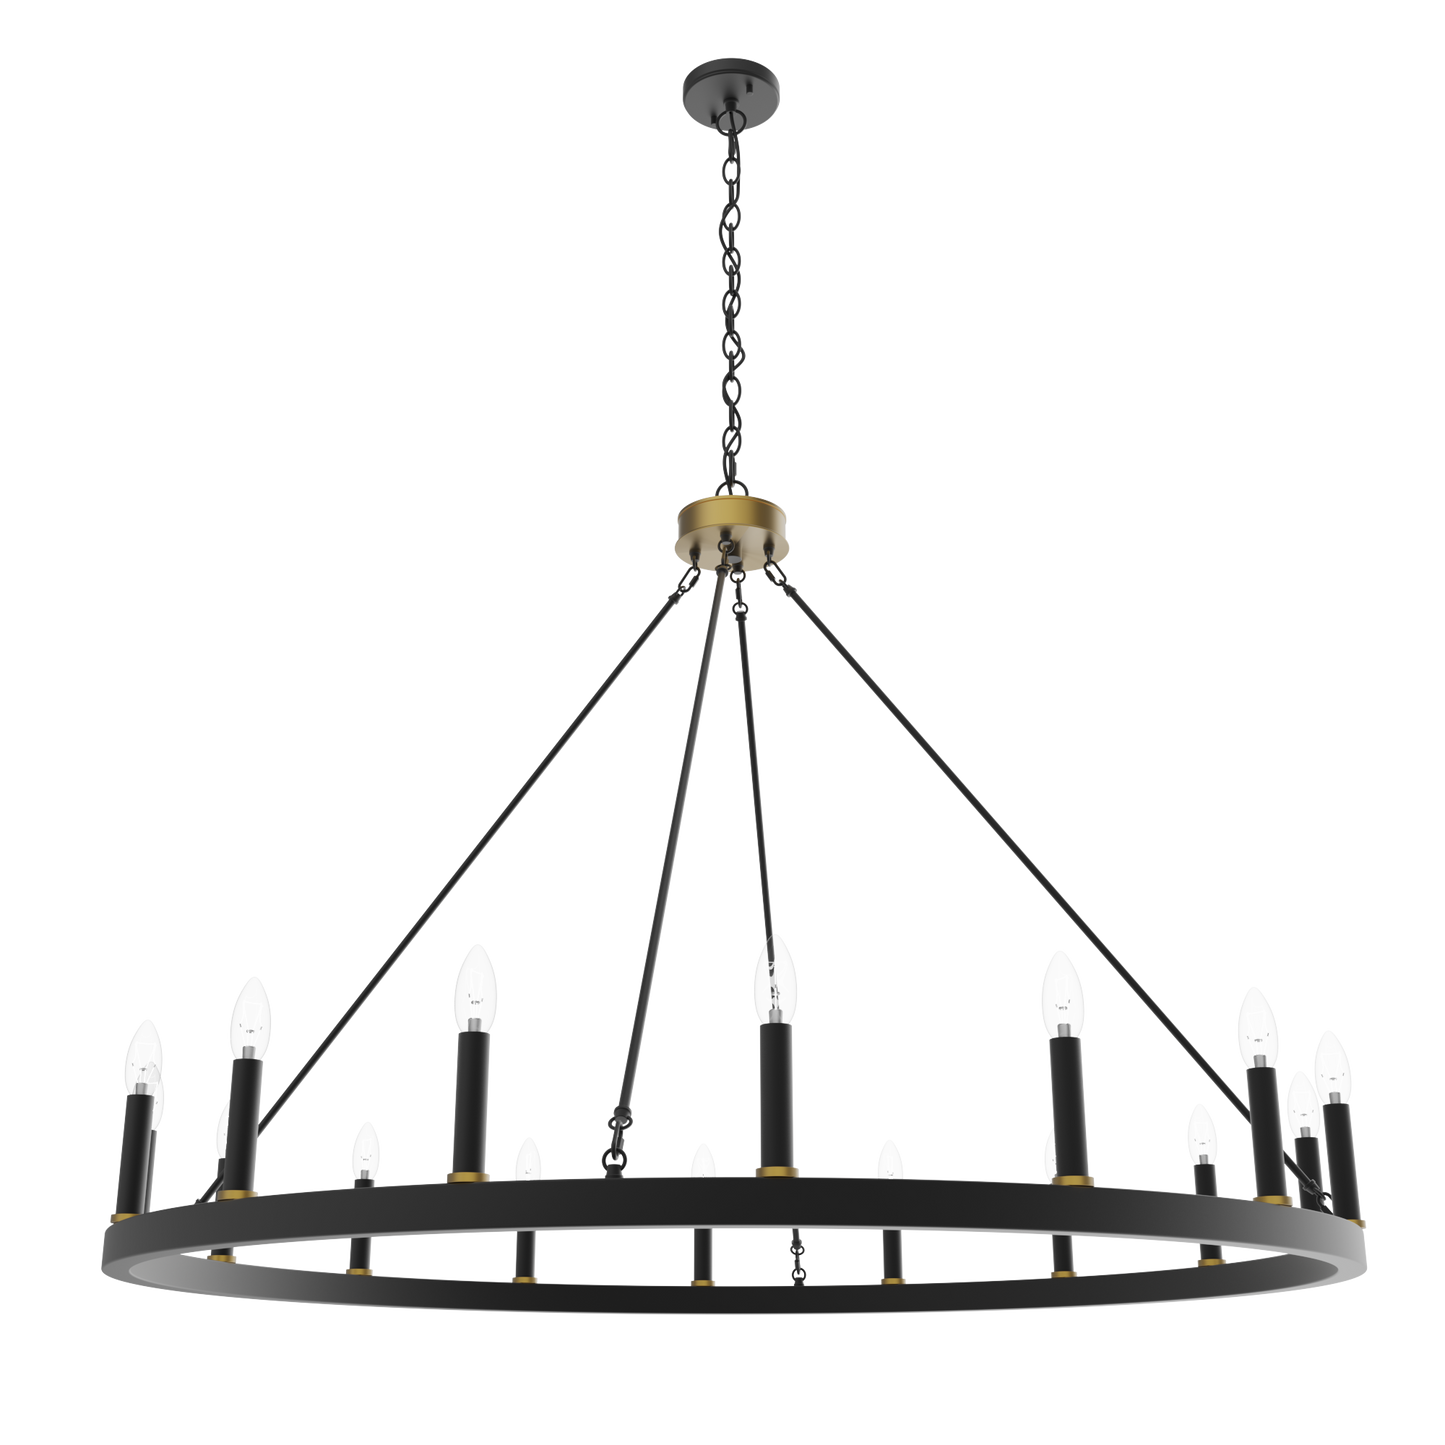 16-Light Classic Candle Style Wagon Wheel Chandelier UL Listed